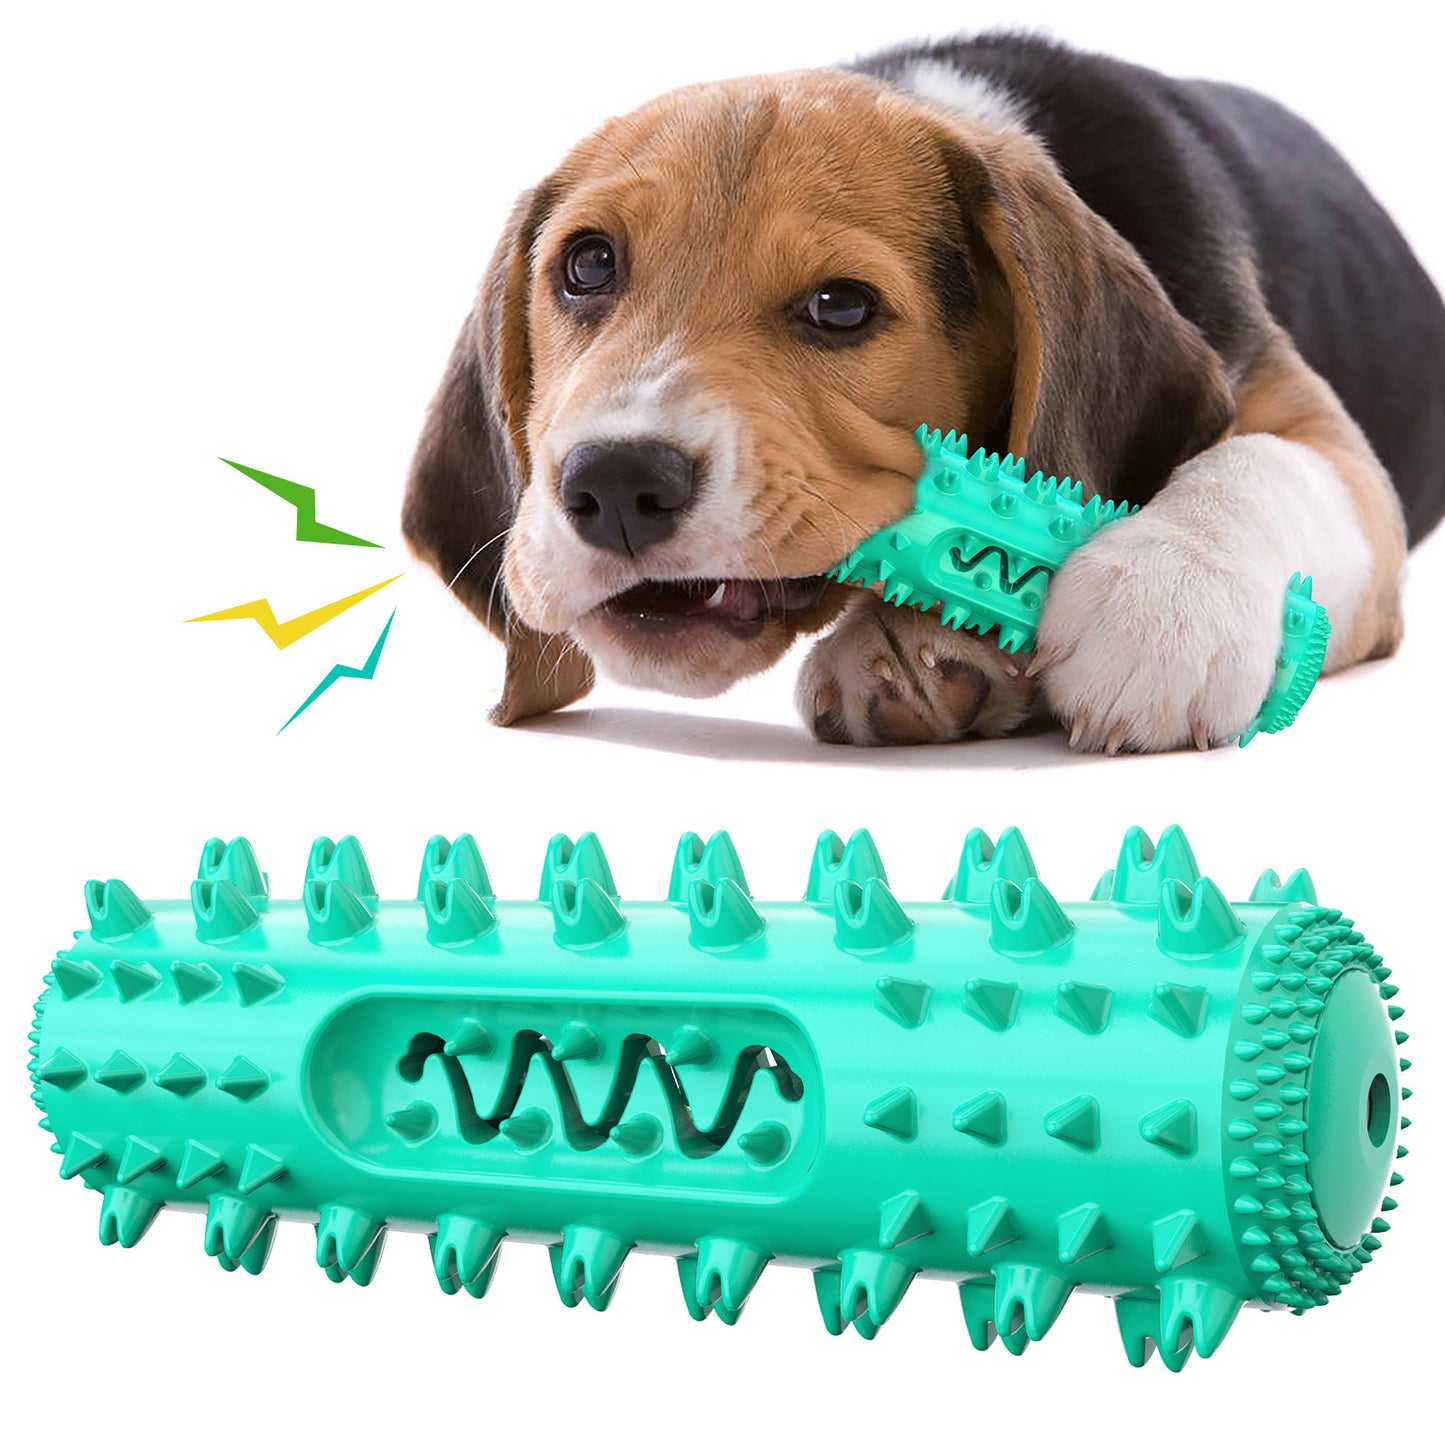 Pet Dog Toothbrush Chew Toys, Upgraded Treasure Chest Sounding Toy